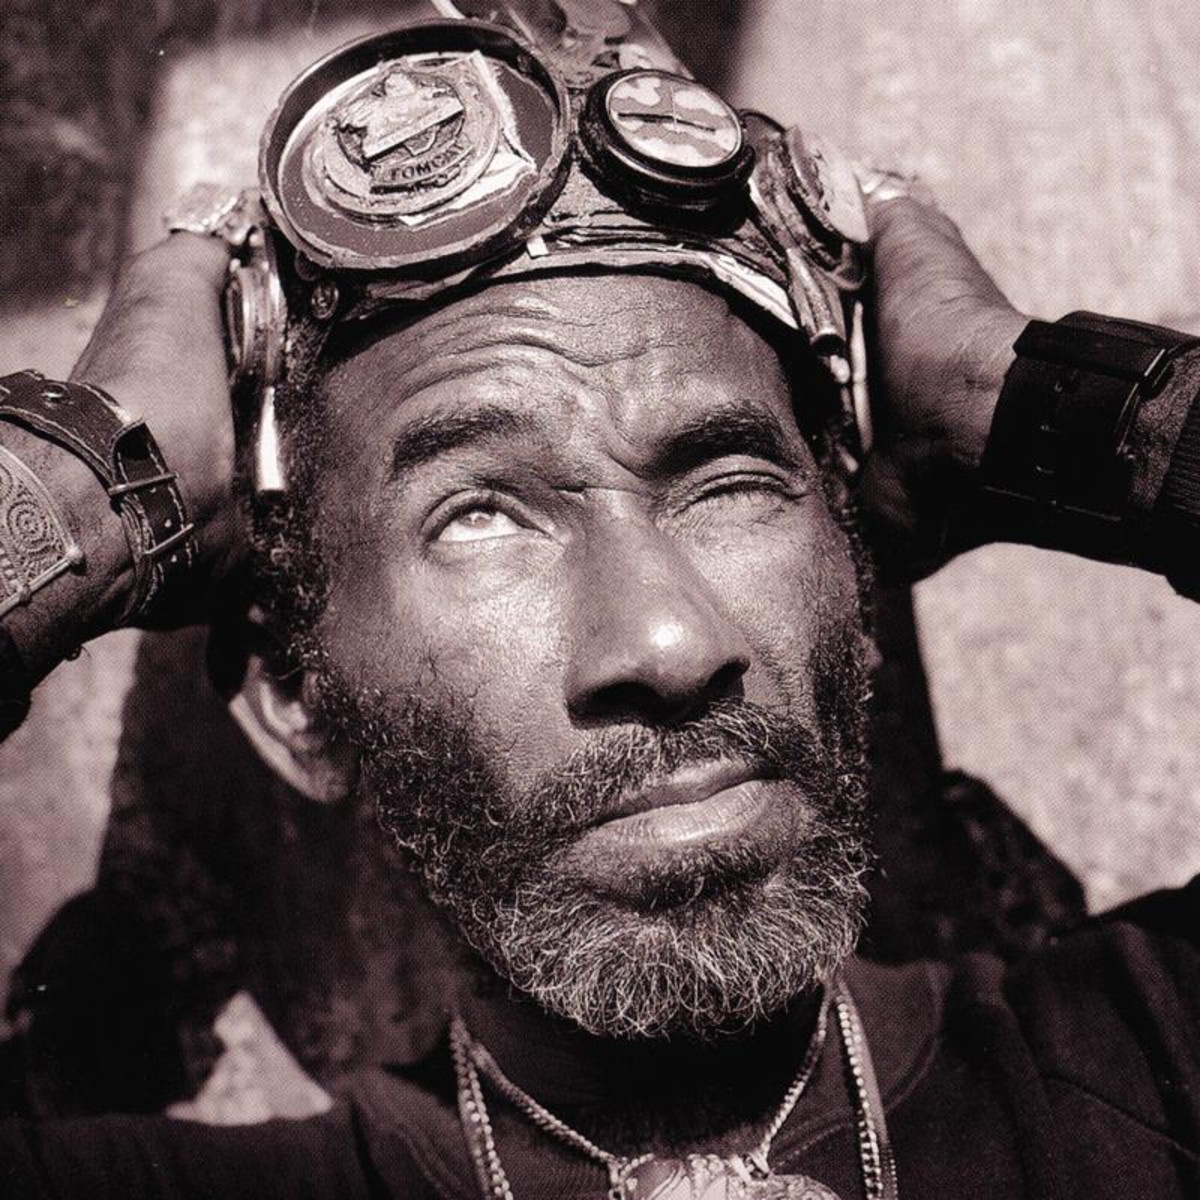 Lee Scratch Perry on the Wire